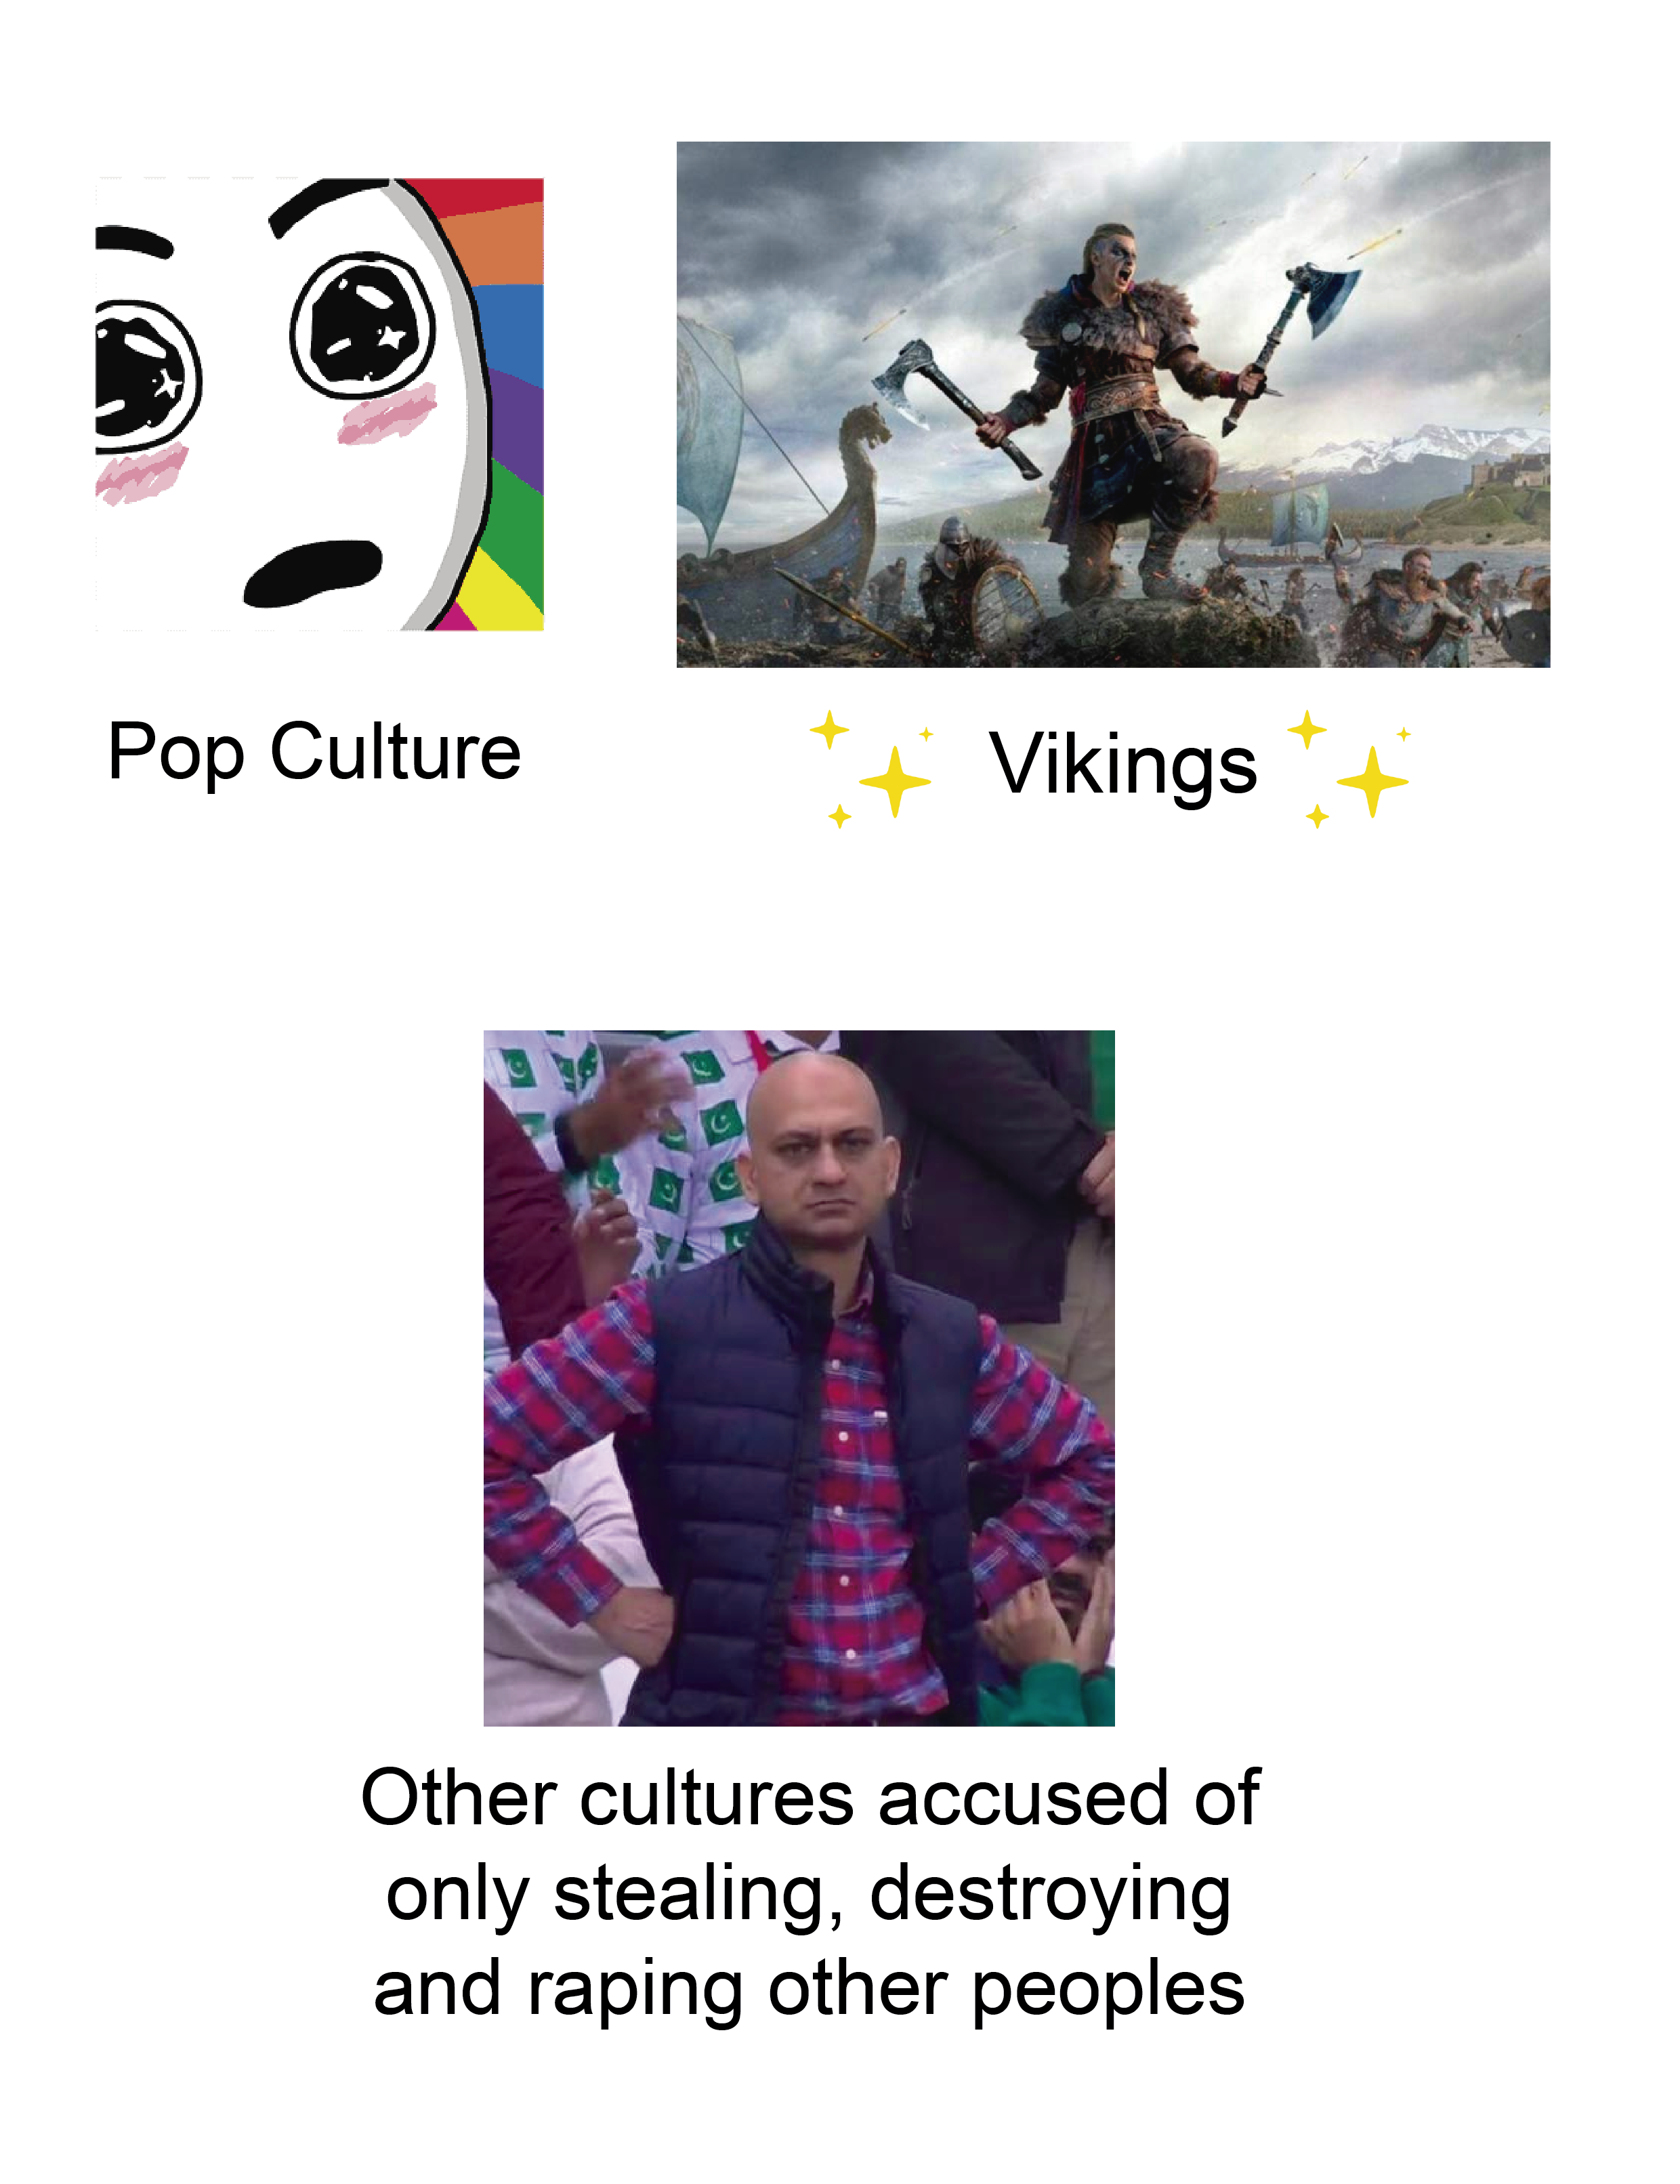 I think we have Vikings too romanticized or at least other equally interesting cultures categorized as simple barbarians.